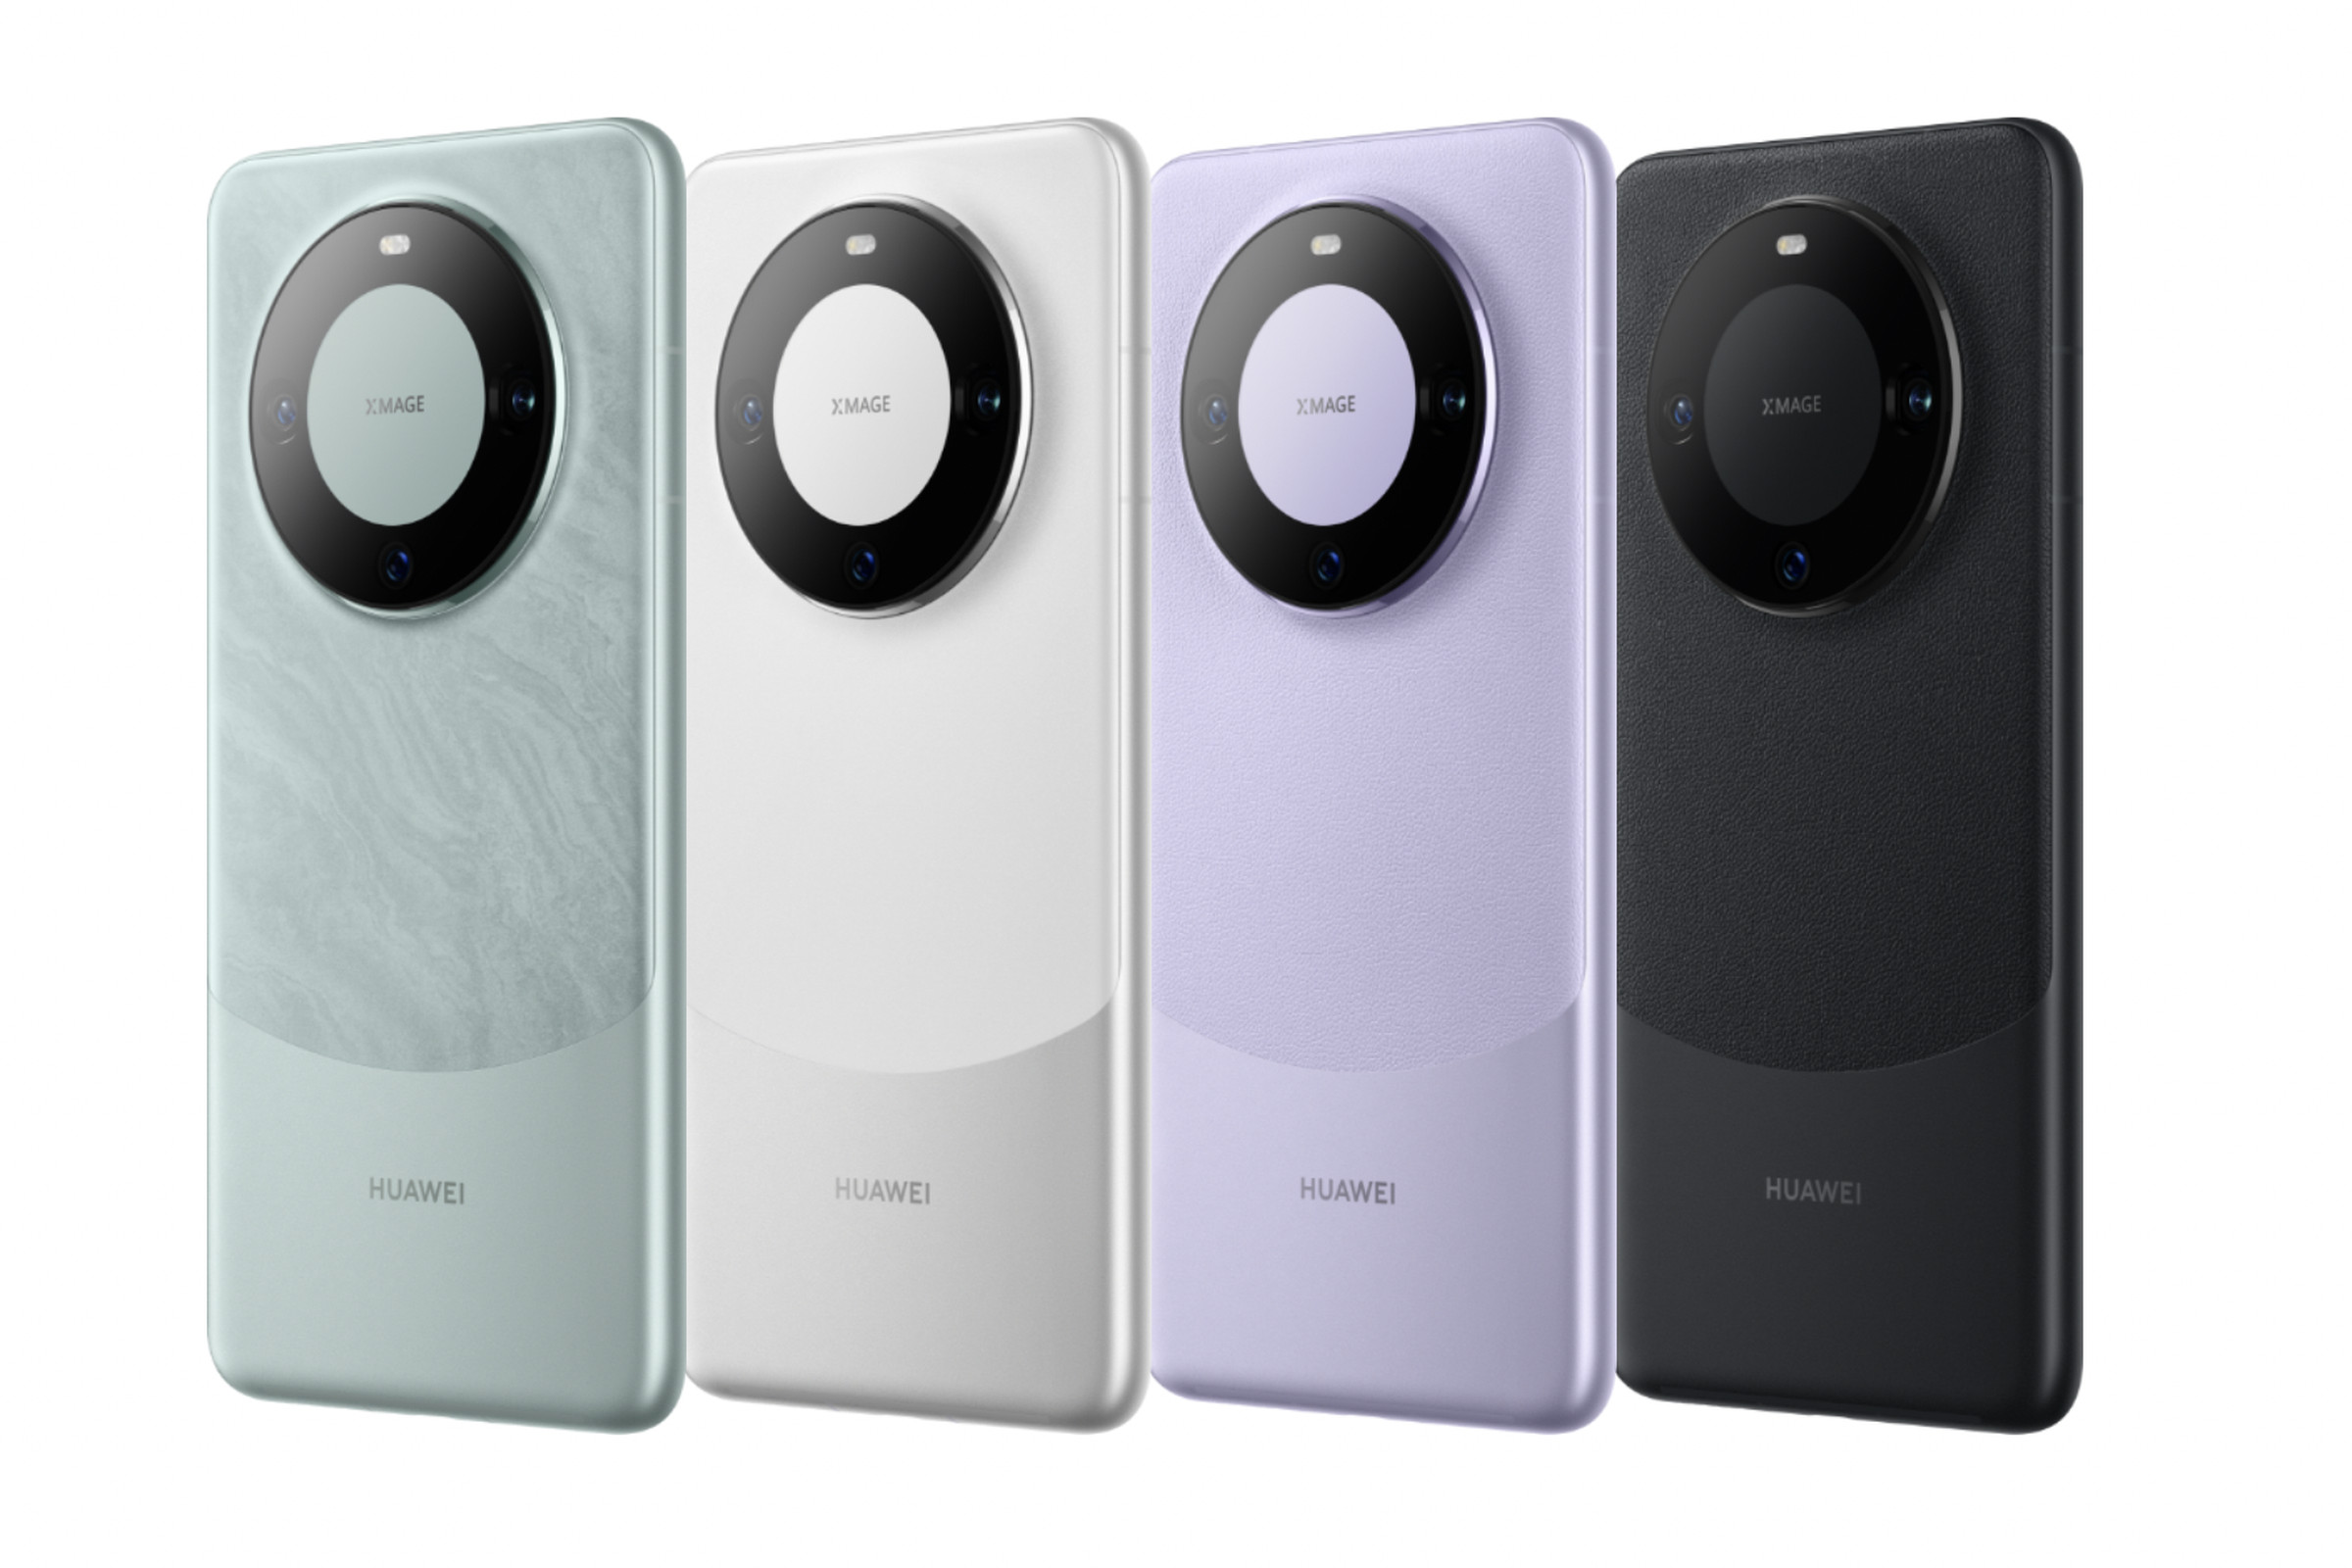 An image showing the Huawei Mate 60 Pro in green, silver, purple, and black